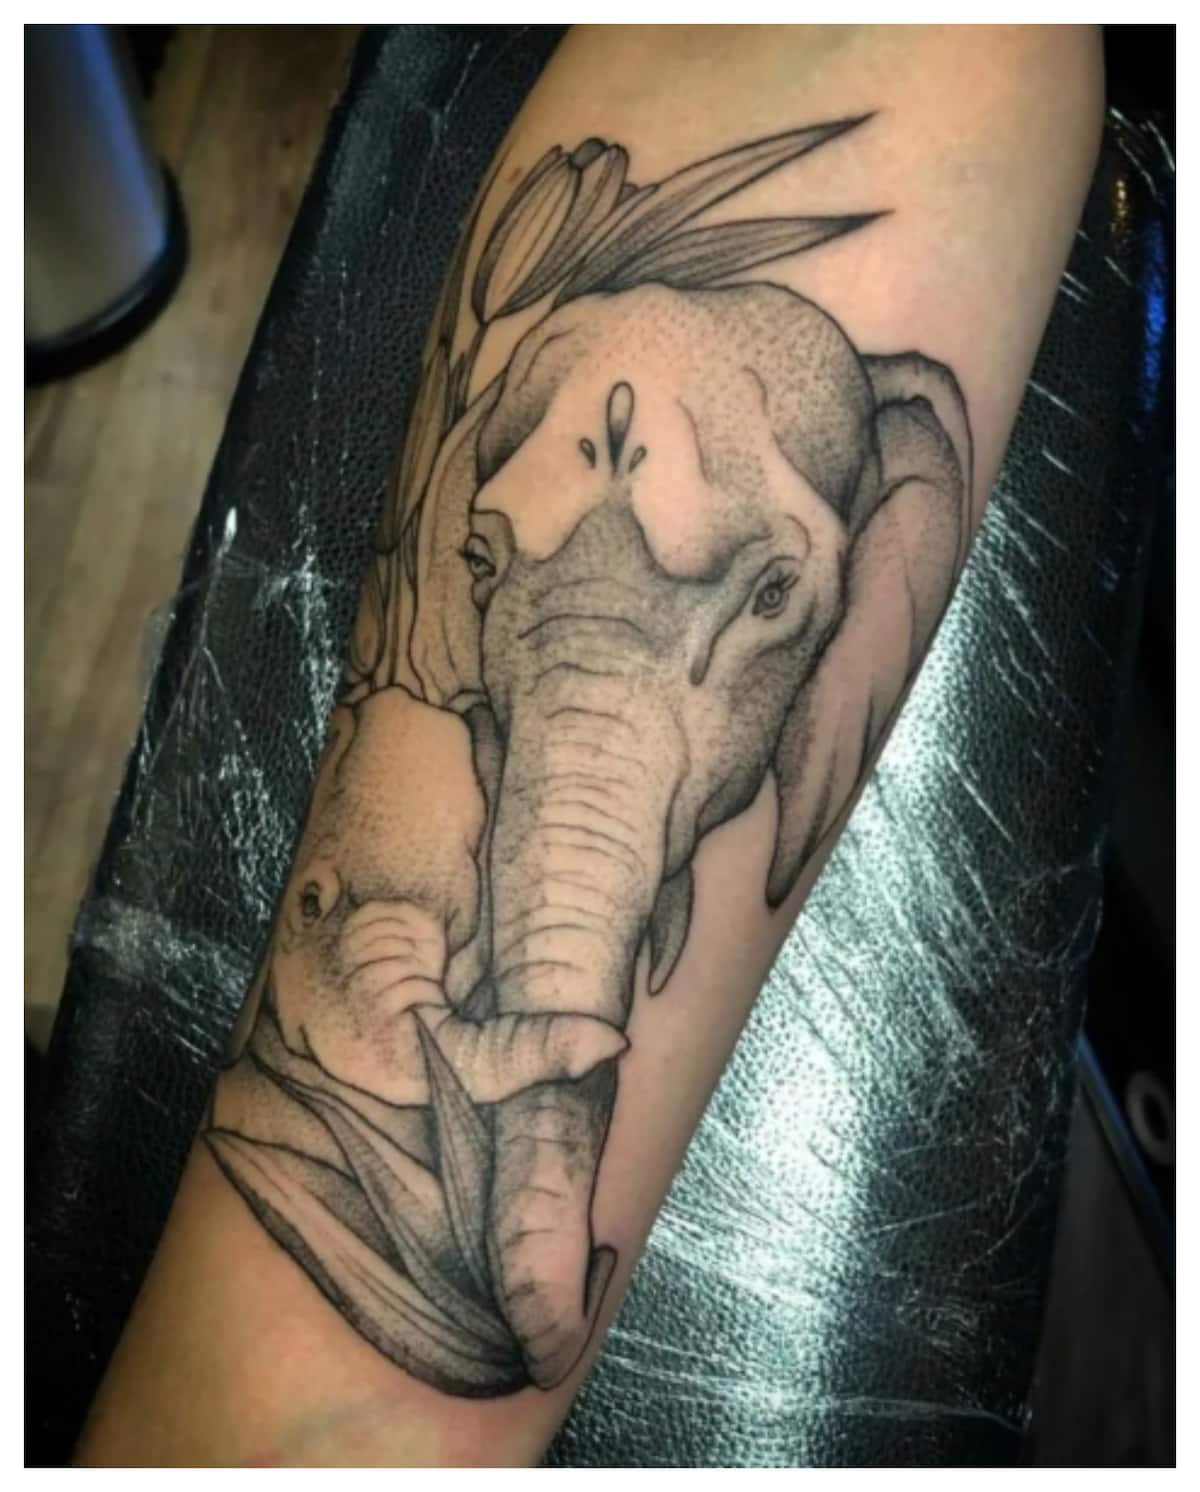 Elephant and galaxy tattoo located on the ankle.